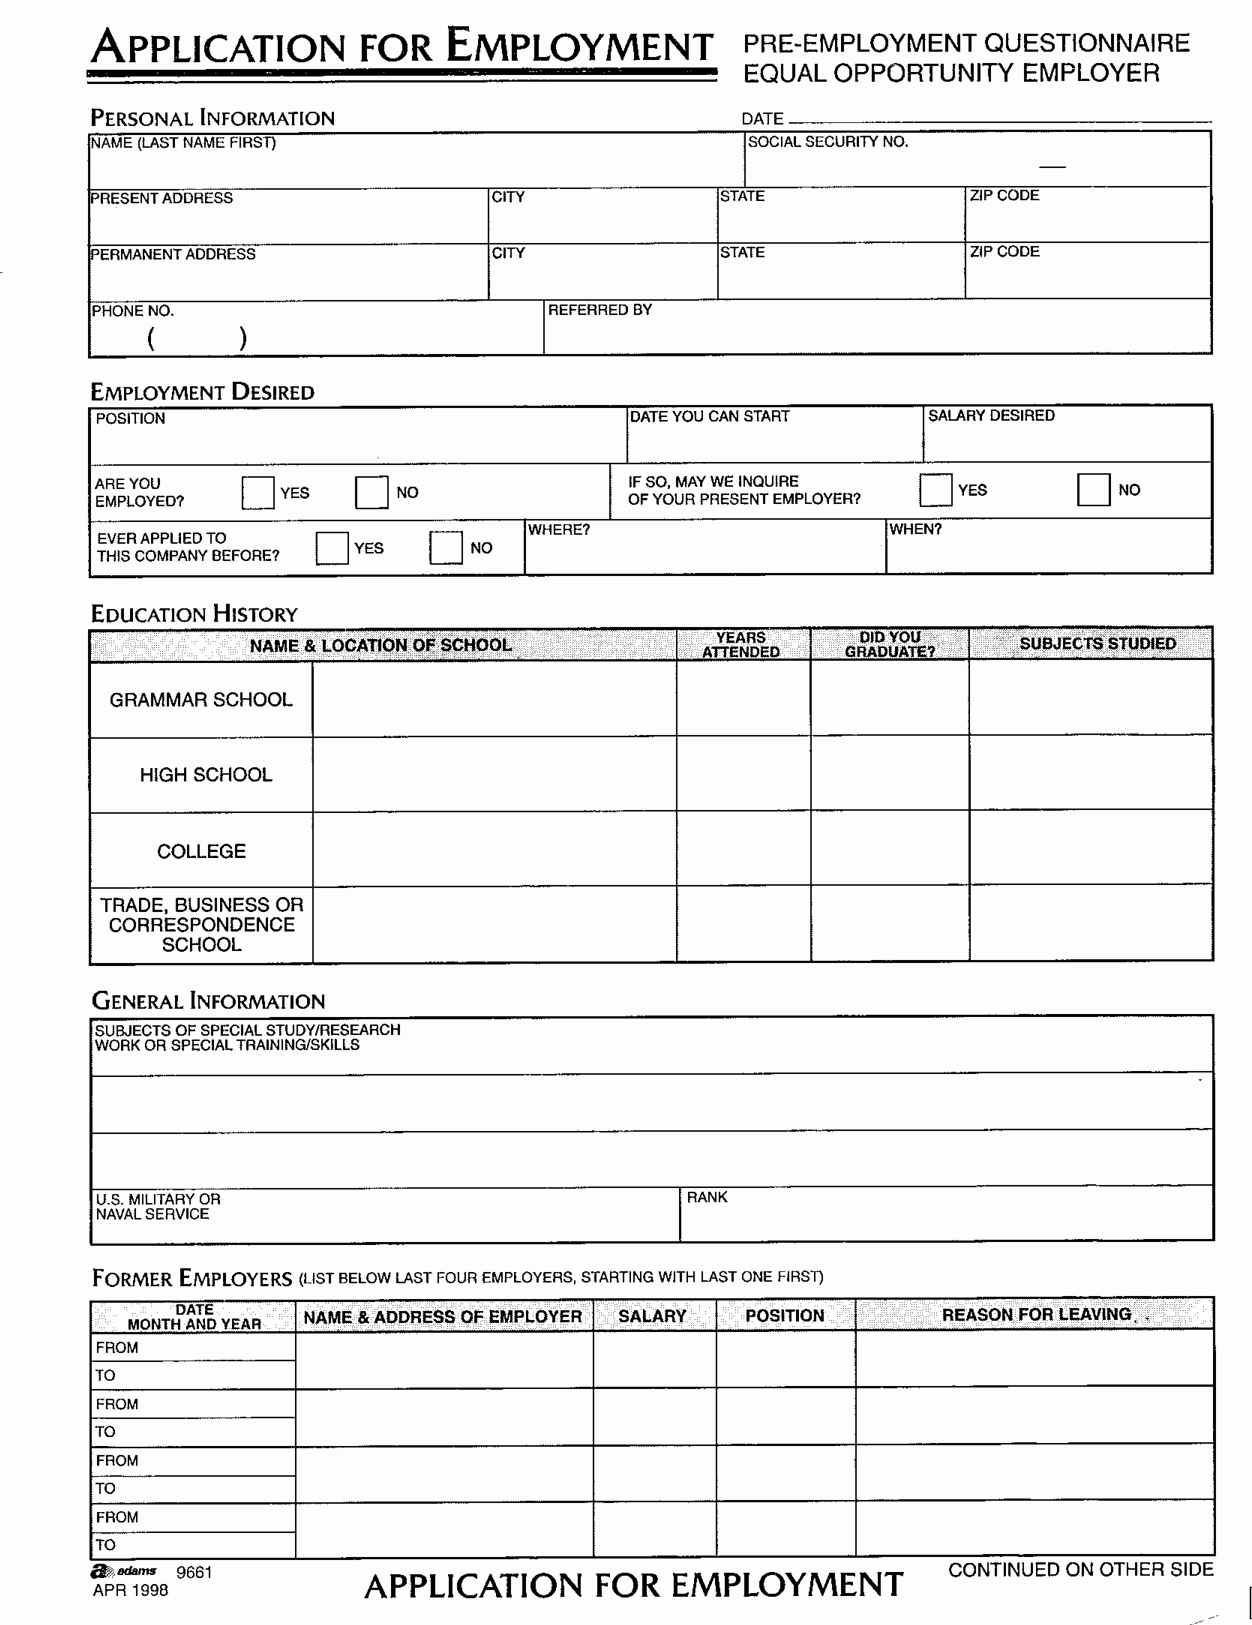 Employer Application Template Best Of Application for Employment Pdf Employment Pany